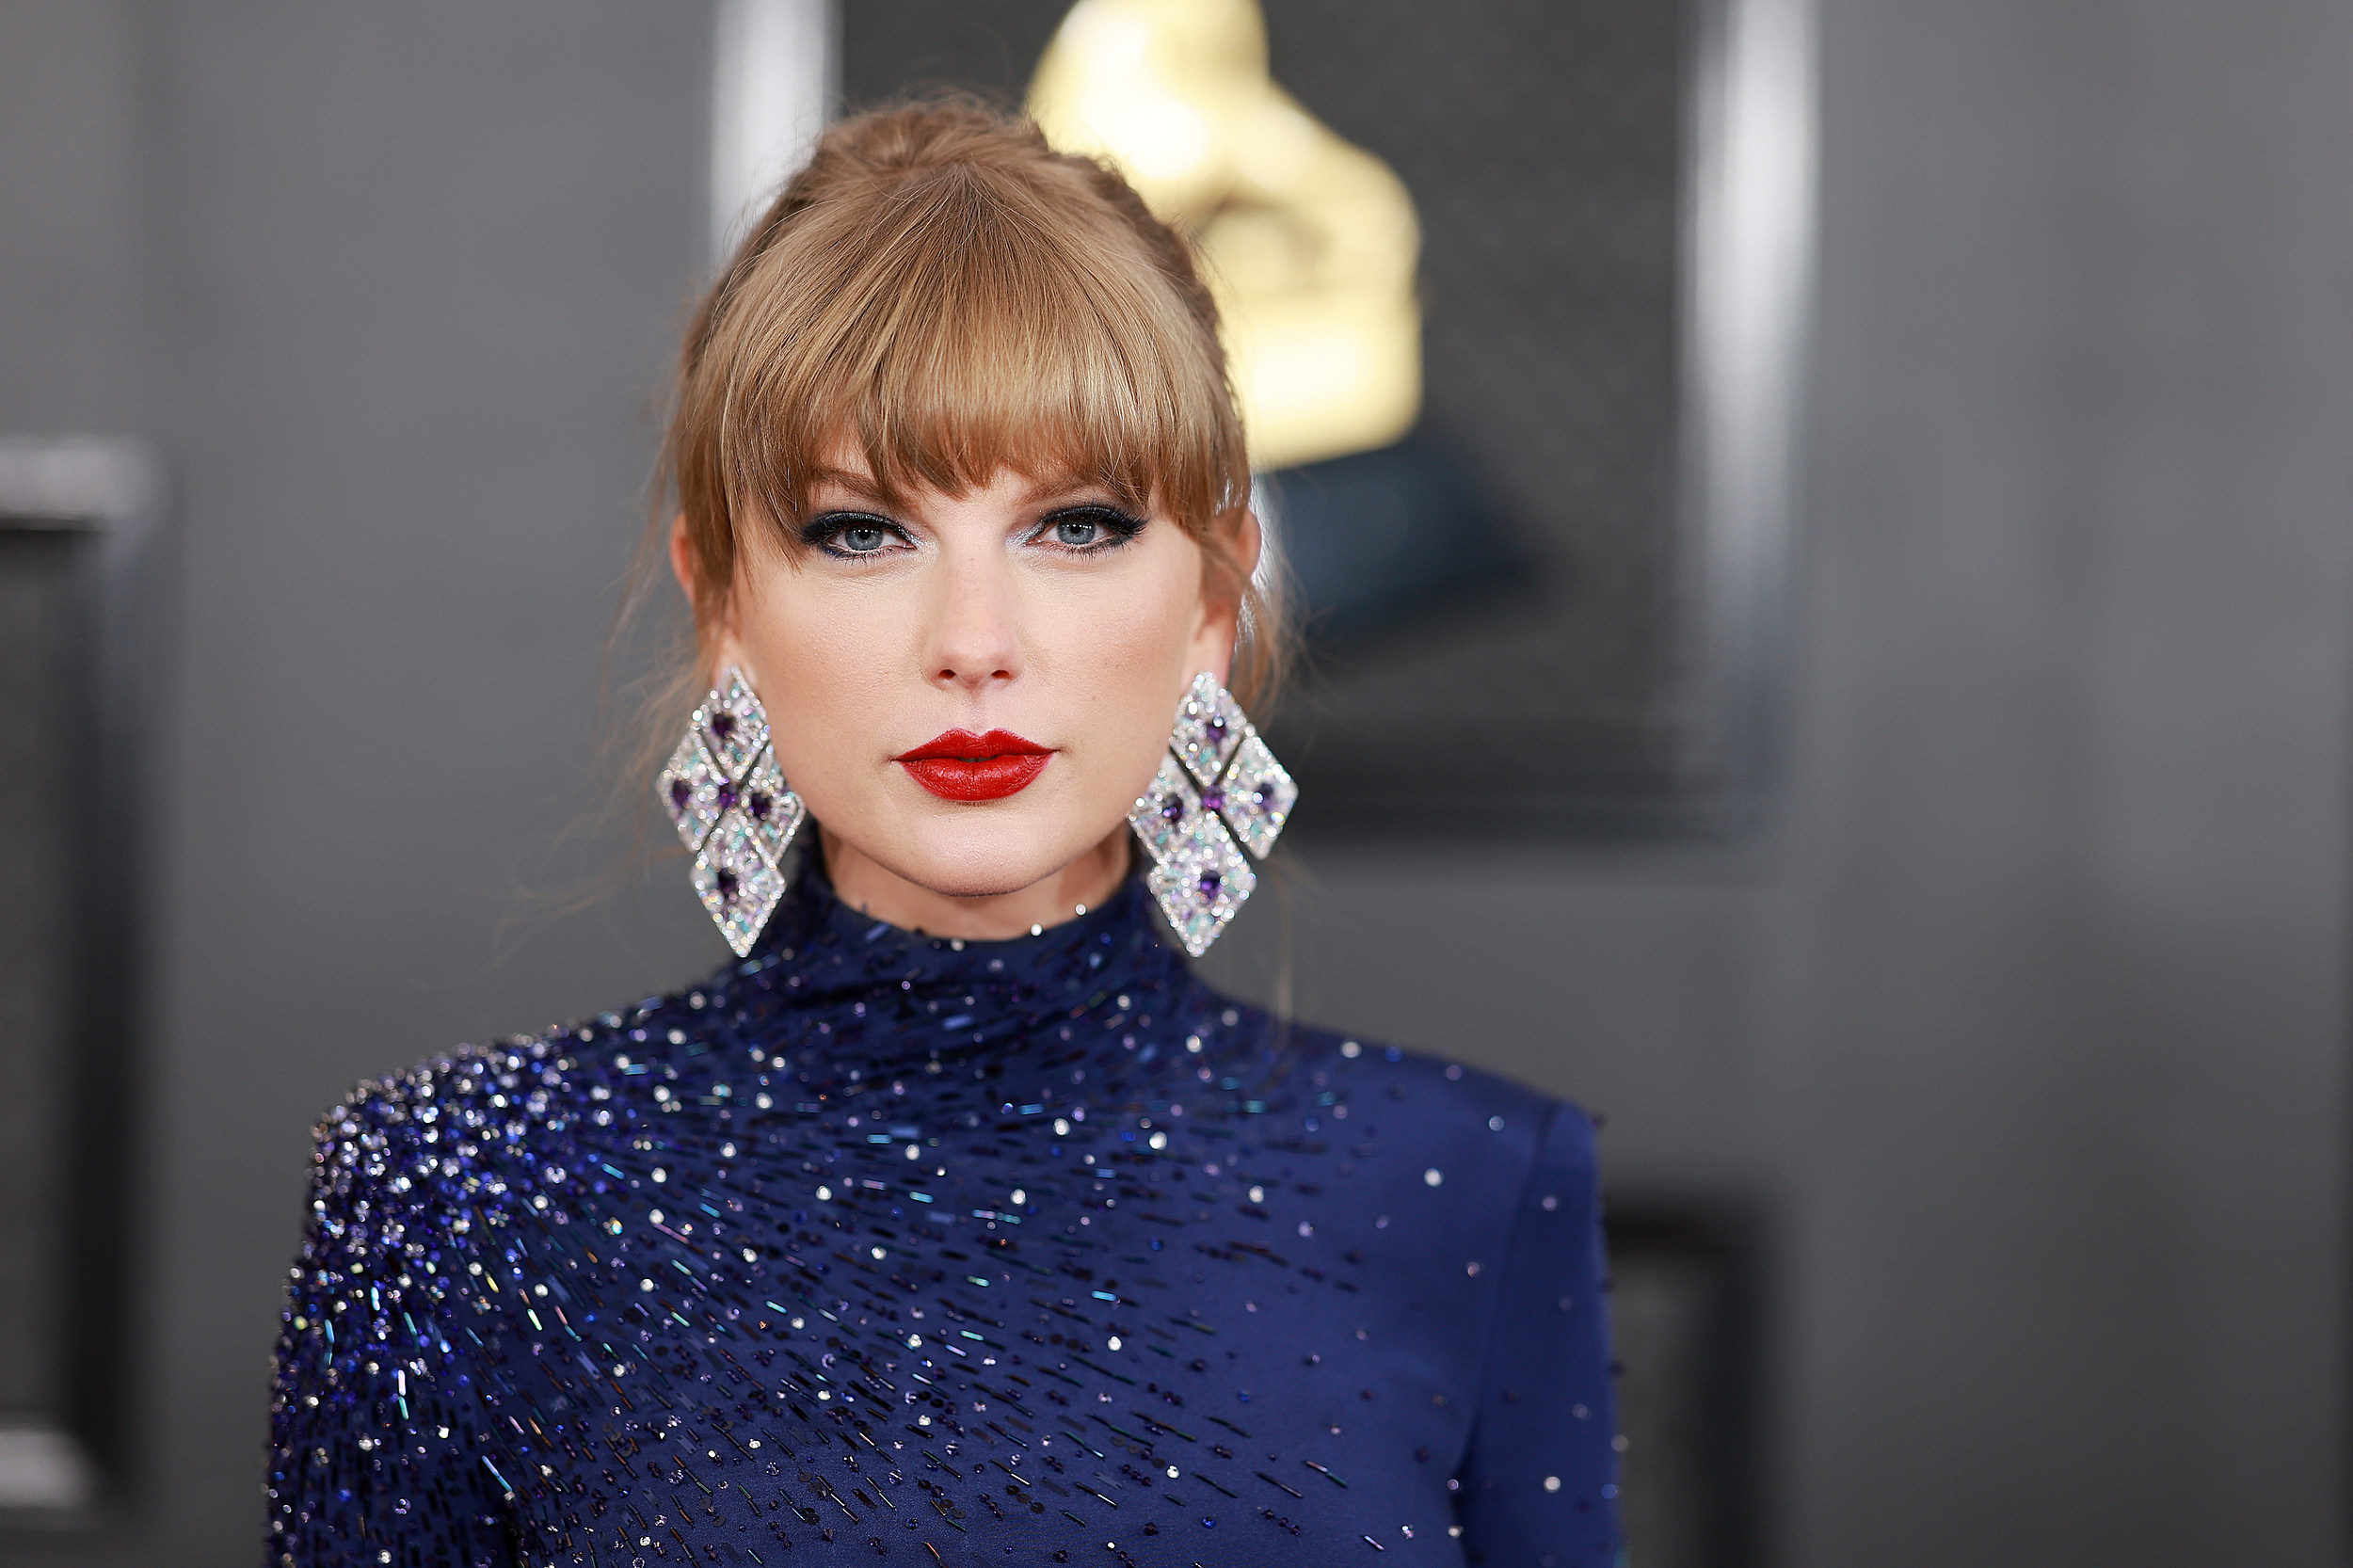 Taylor Swift Drinking Game Allegedly Causes Flight Delay Due To Puking  Passenger